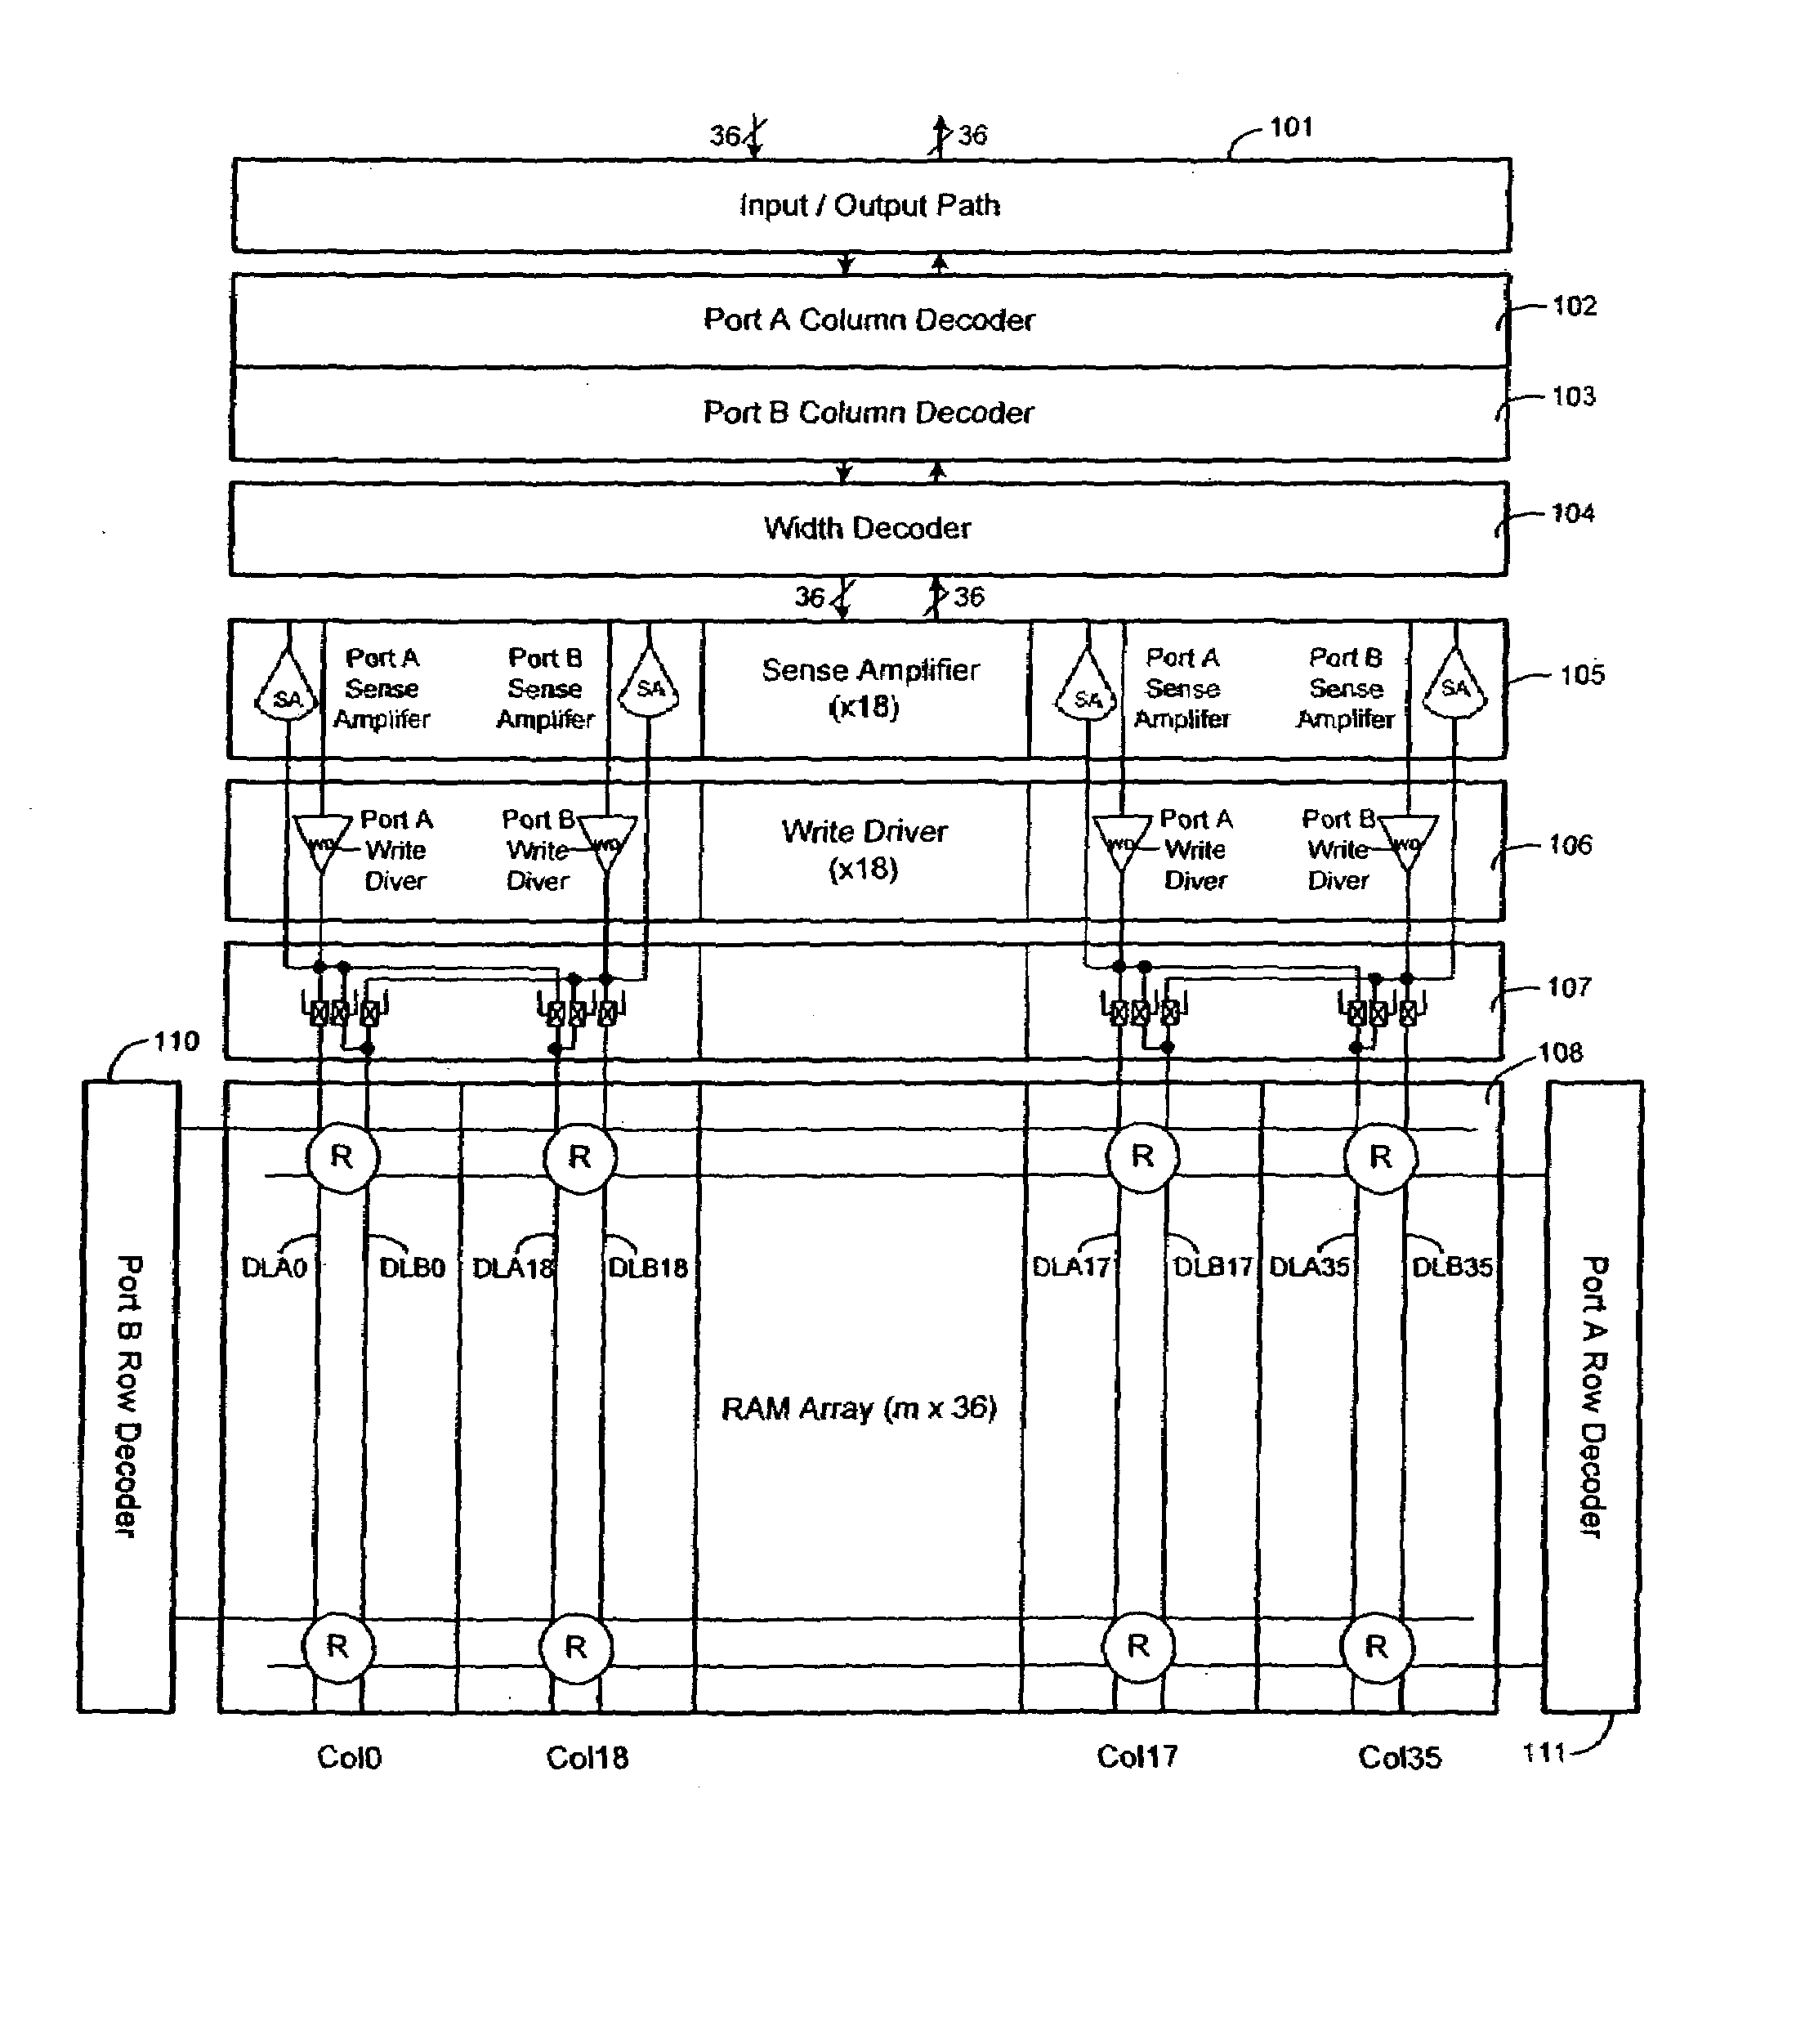 Dual-port memory array using shared write drivers and read sense amplifiers